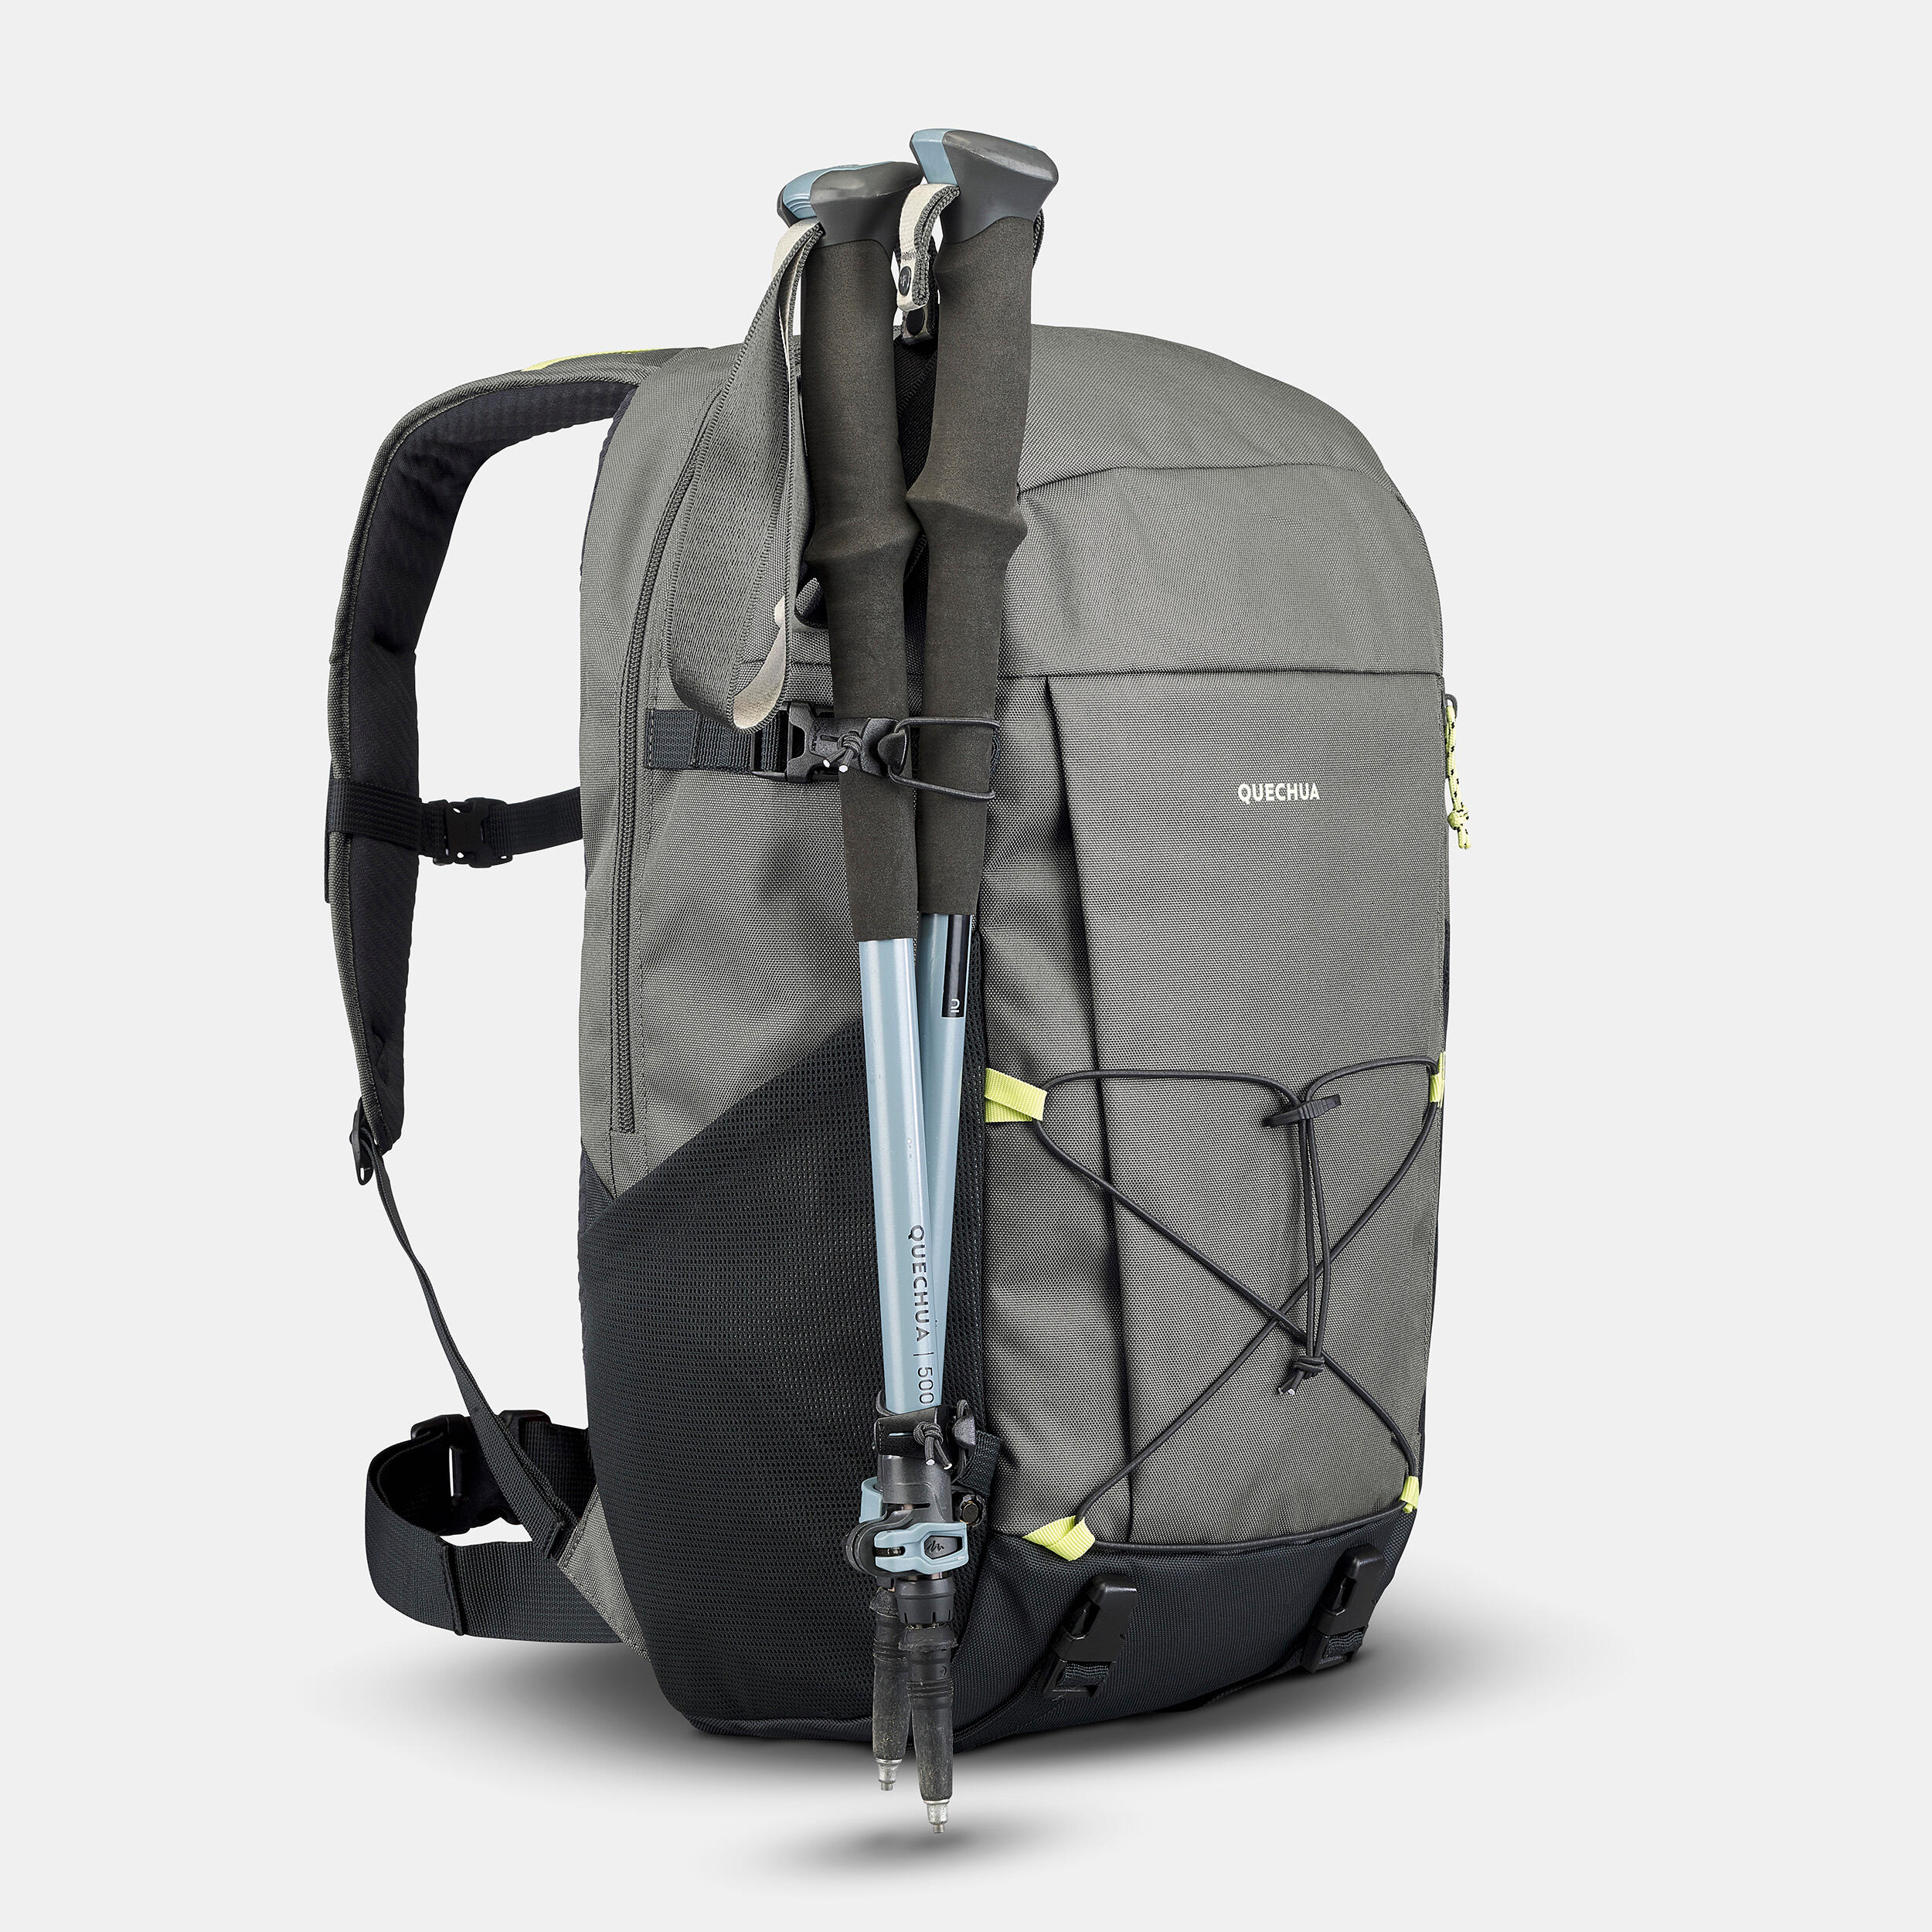 Decathlon Quechua backpack, Men's Fashion, Bags, Backpacks on Carousell